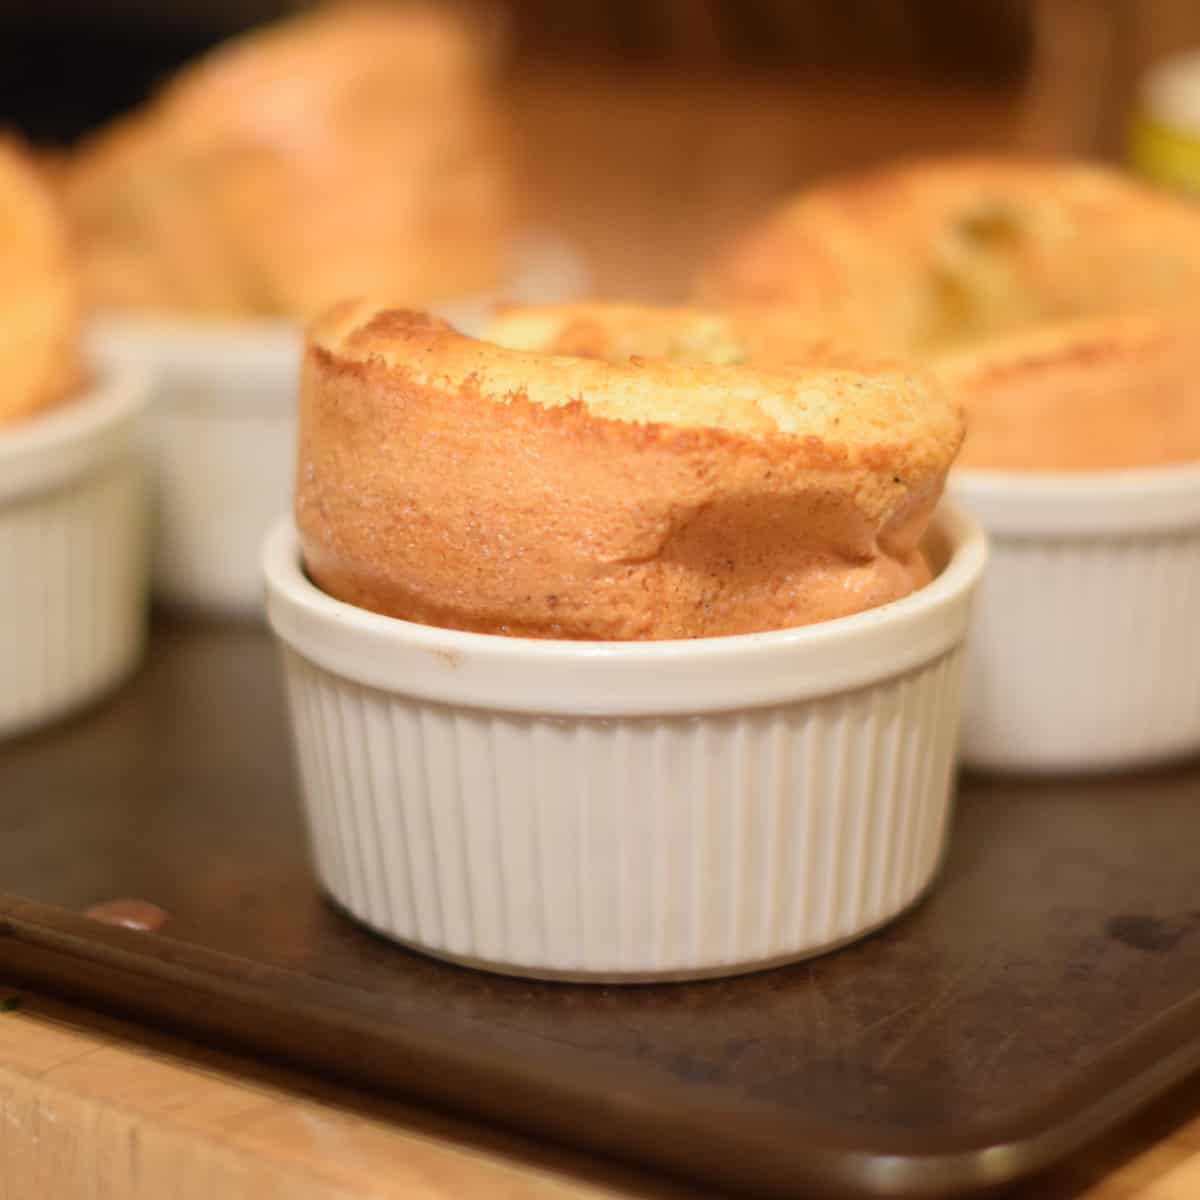 A fluffy Yorkshire pudding in a white ramikin.